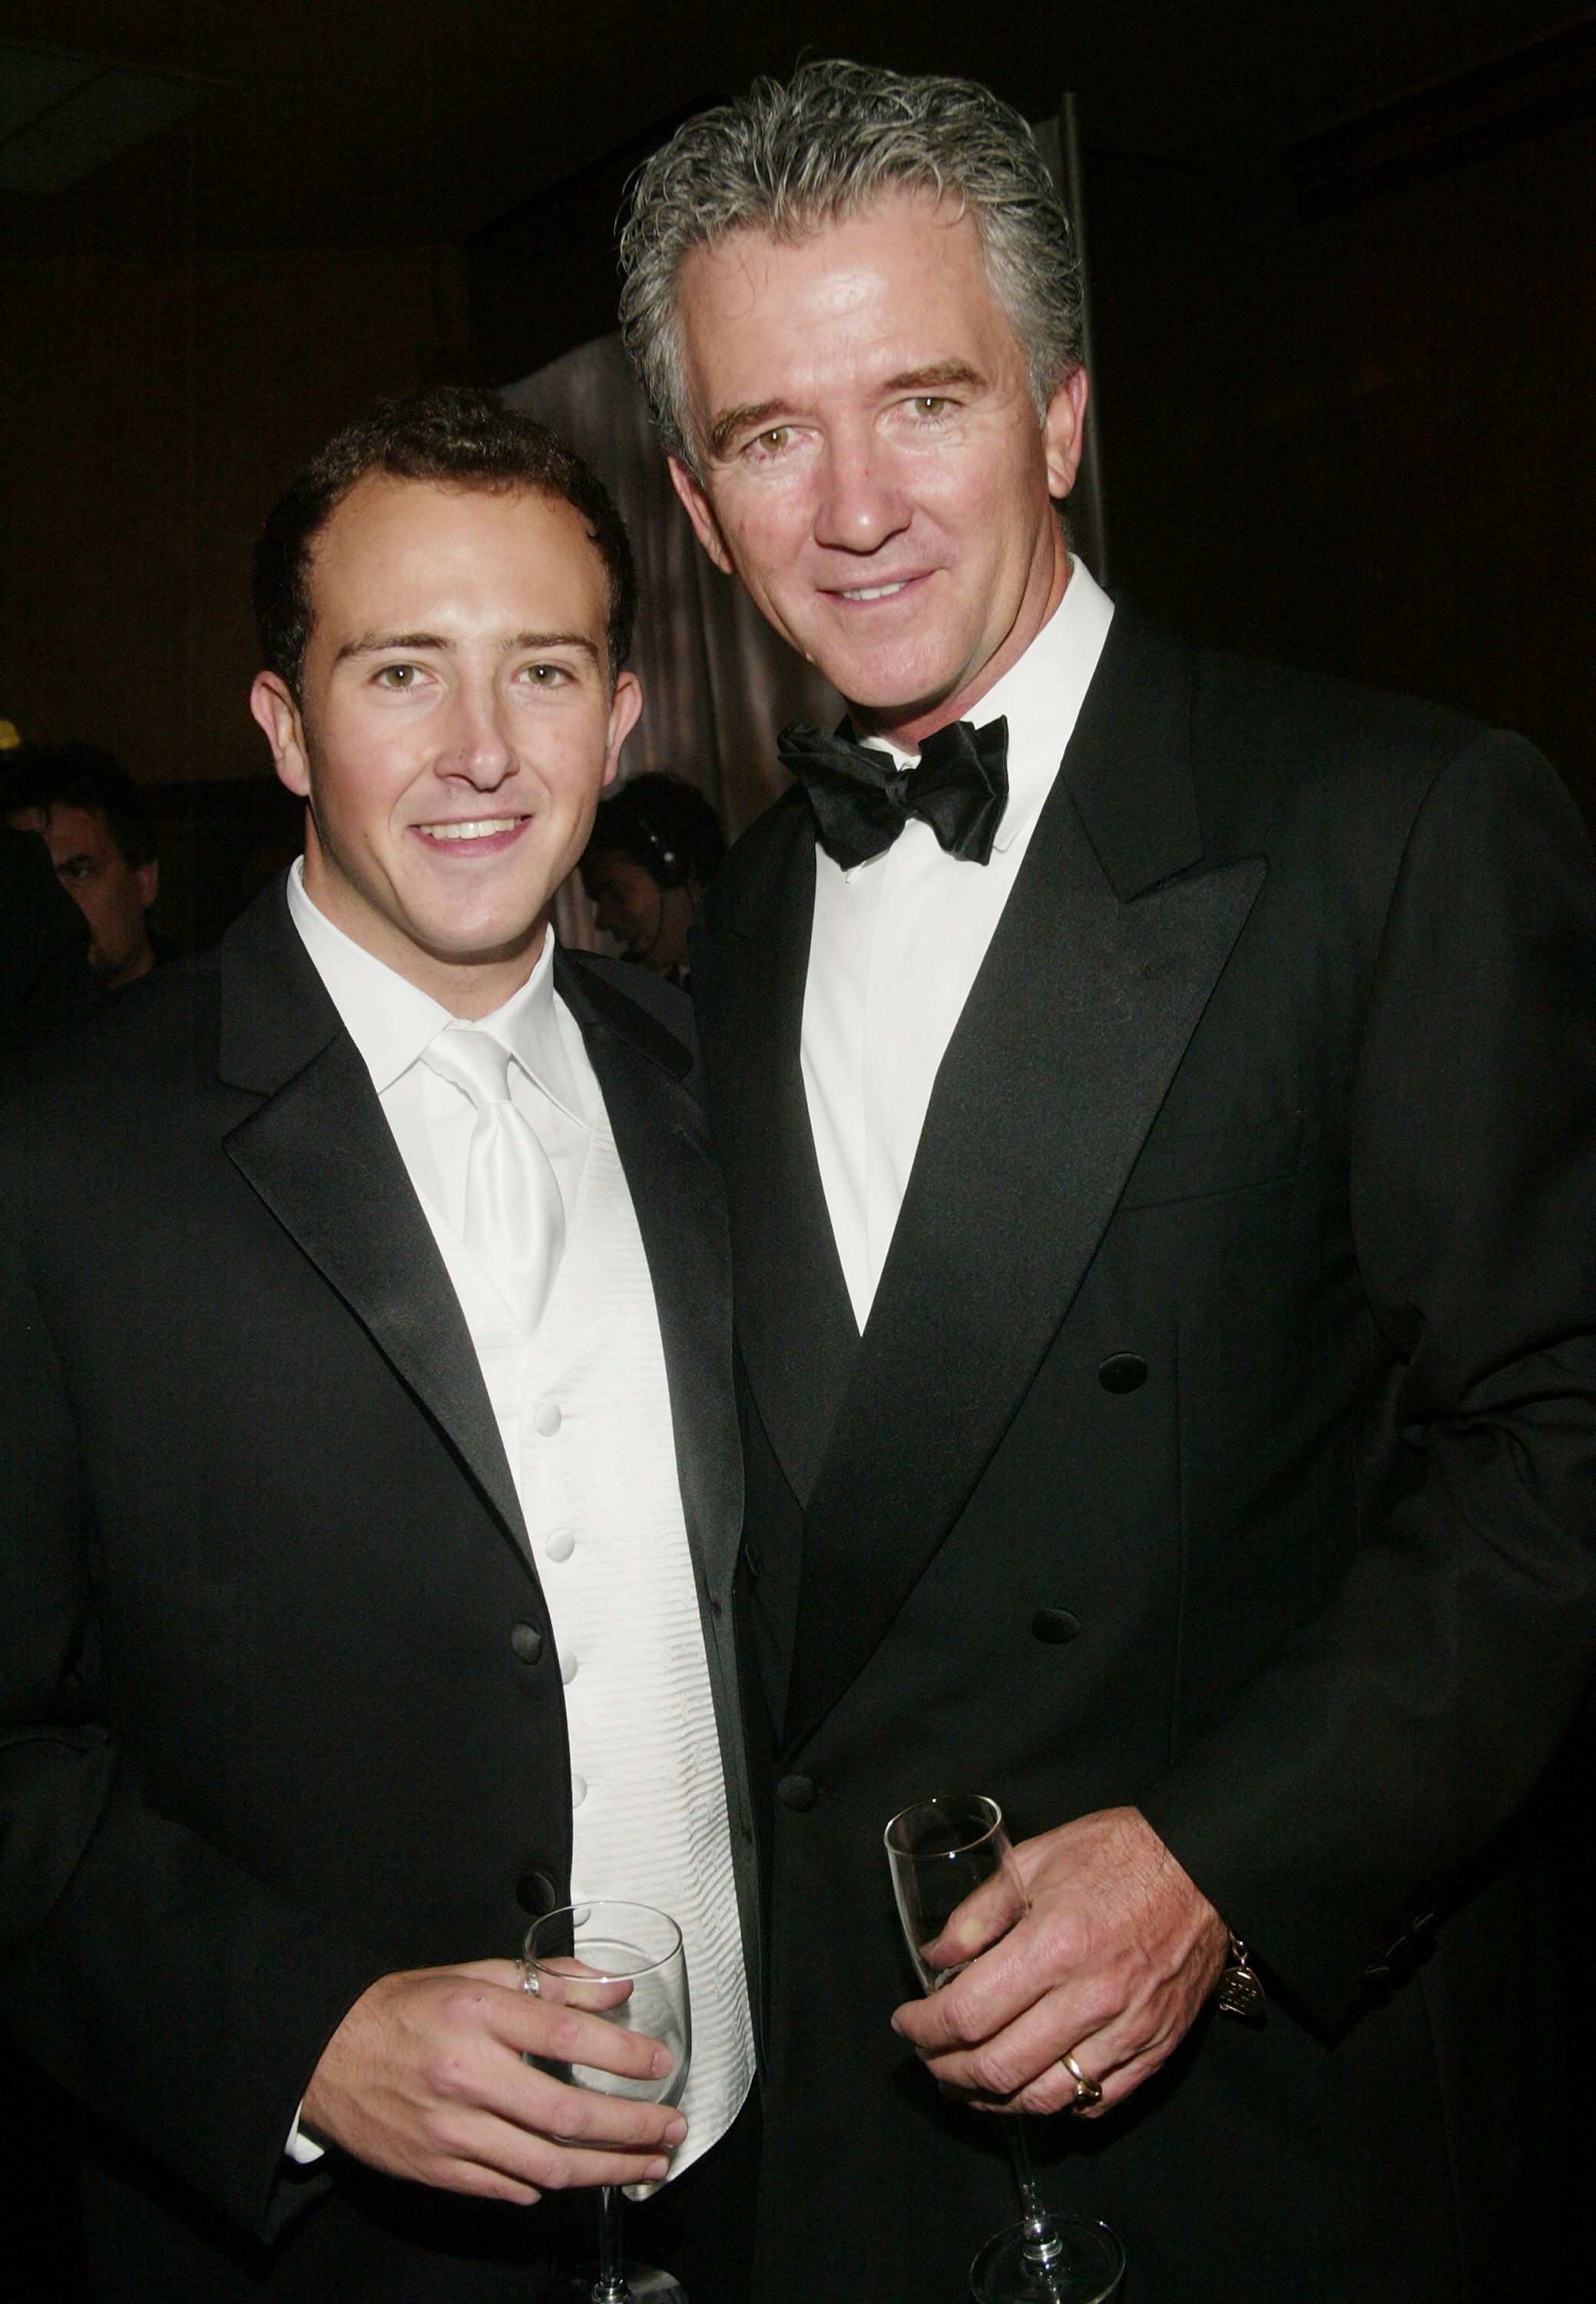 Patrick Duffy and son Conor attend the cocktail party for the "CBS at 75" television gala at the Hammerstein Ballroom on November 2, 2003, in New York City. | Source: Getty Images